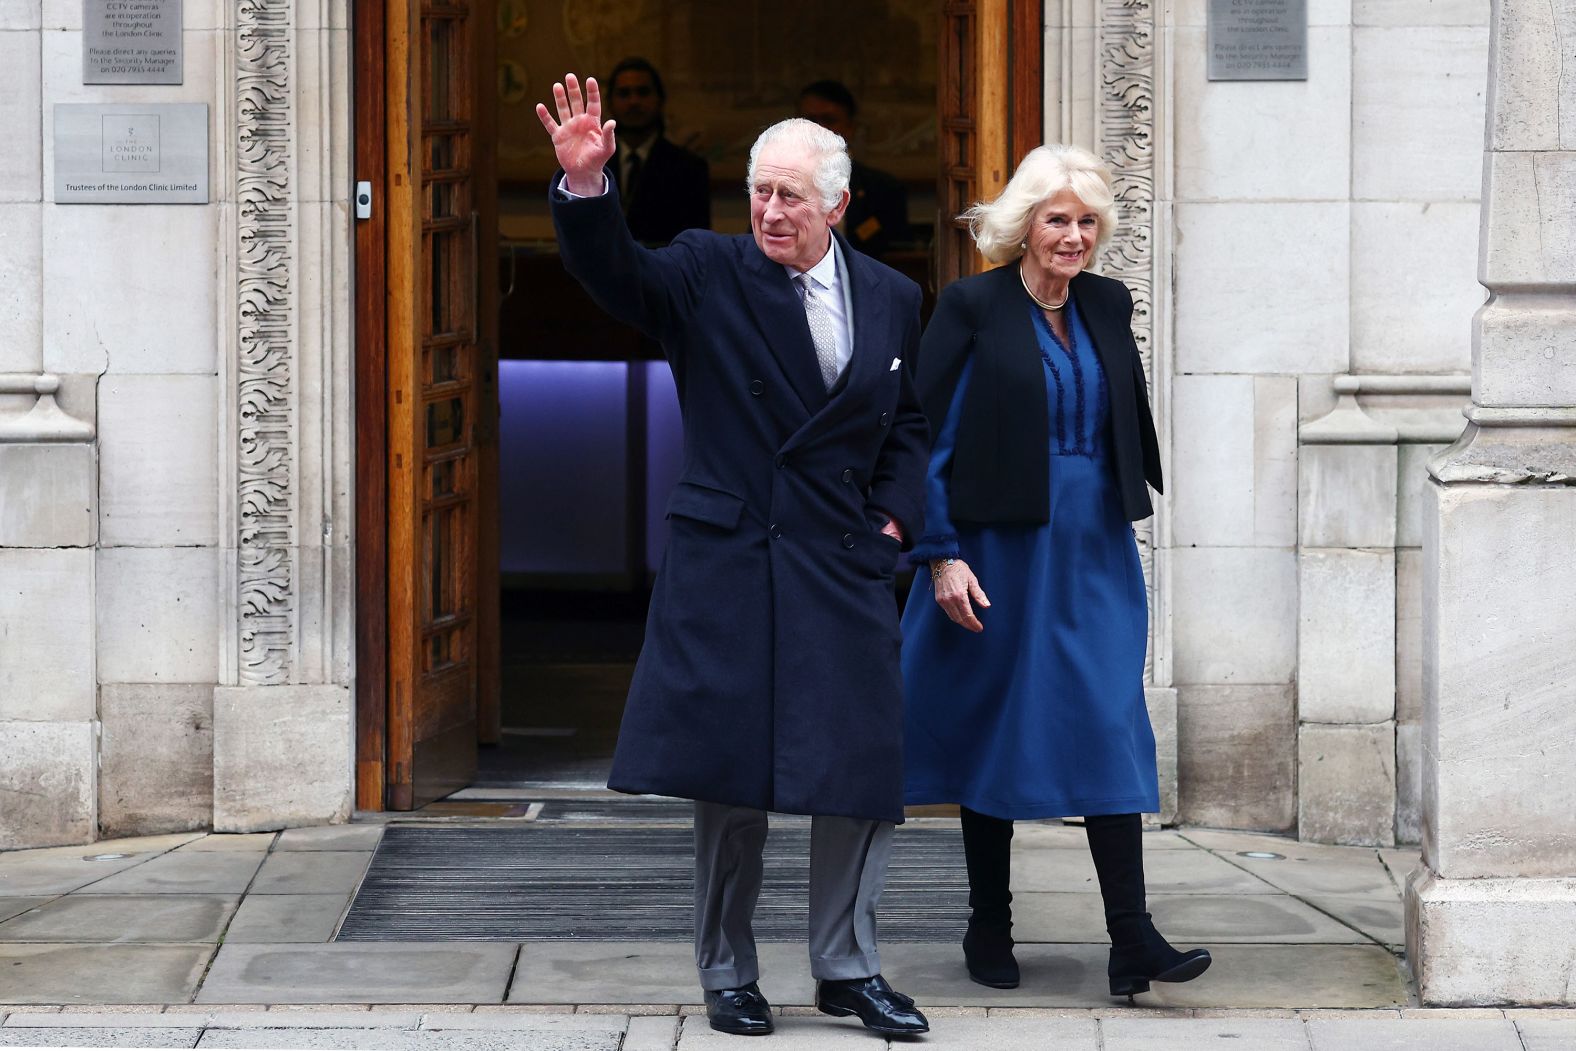 The King waves as he leaves the London Clinic with Queen Camilla in January 2024. The King <a href="https://www.cnn.com/2024/01/26/uk/king-charles-iii-hospital-prostate-procedure-intl/index.html" target="_blank">underwent a corrective procedure for an enlarged prostate</a>, CNN understands. In early February, Buckingham Palace announced that the King <a href="https://www.cnn.com/2024/02/05/europe/uk-royal-announcement-gbr-intl/index.html" target="_blank">has been diagnosed with a form of cancer</a>.